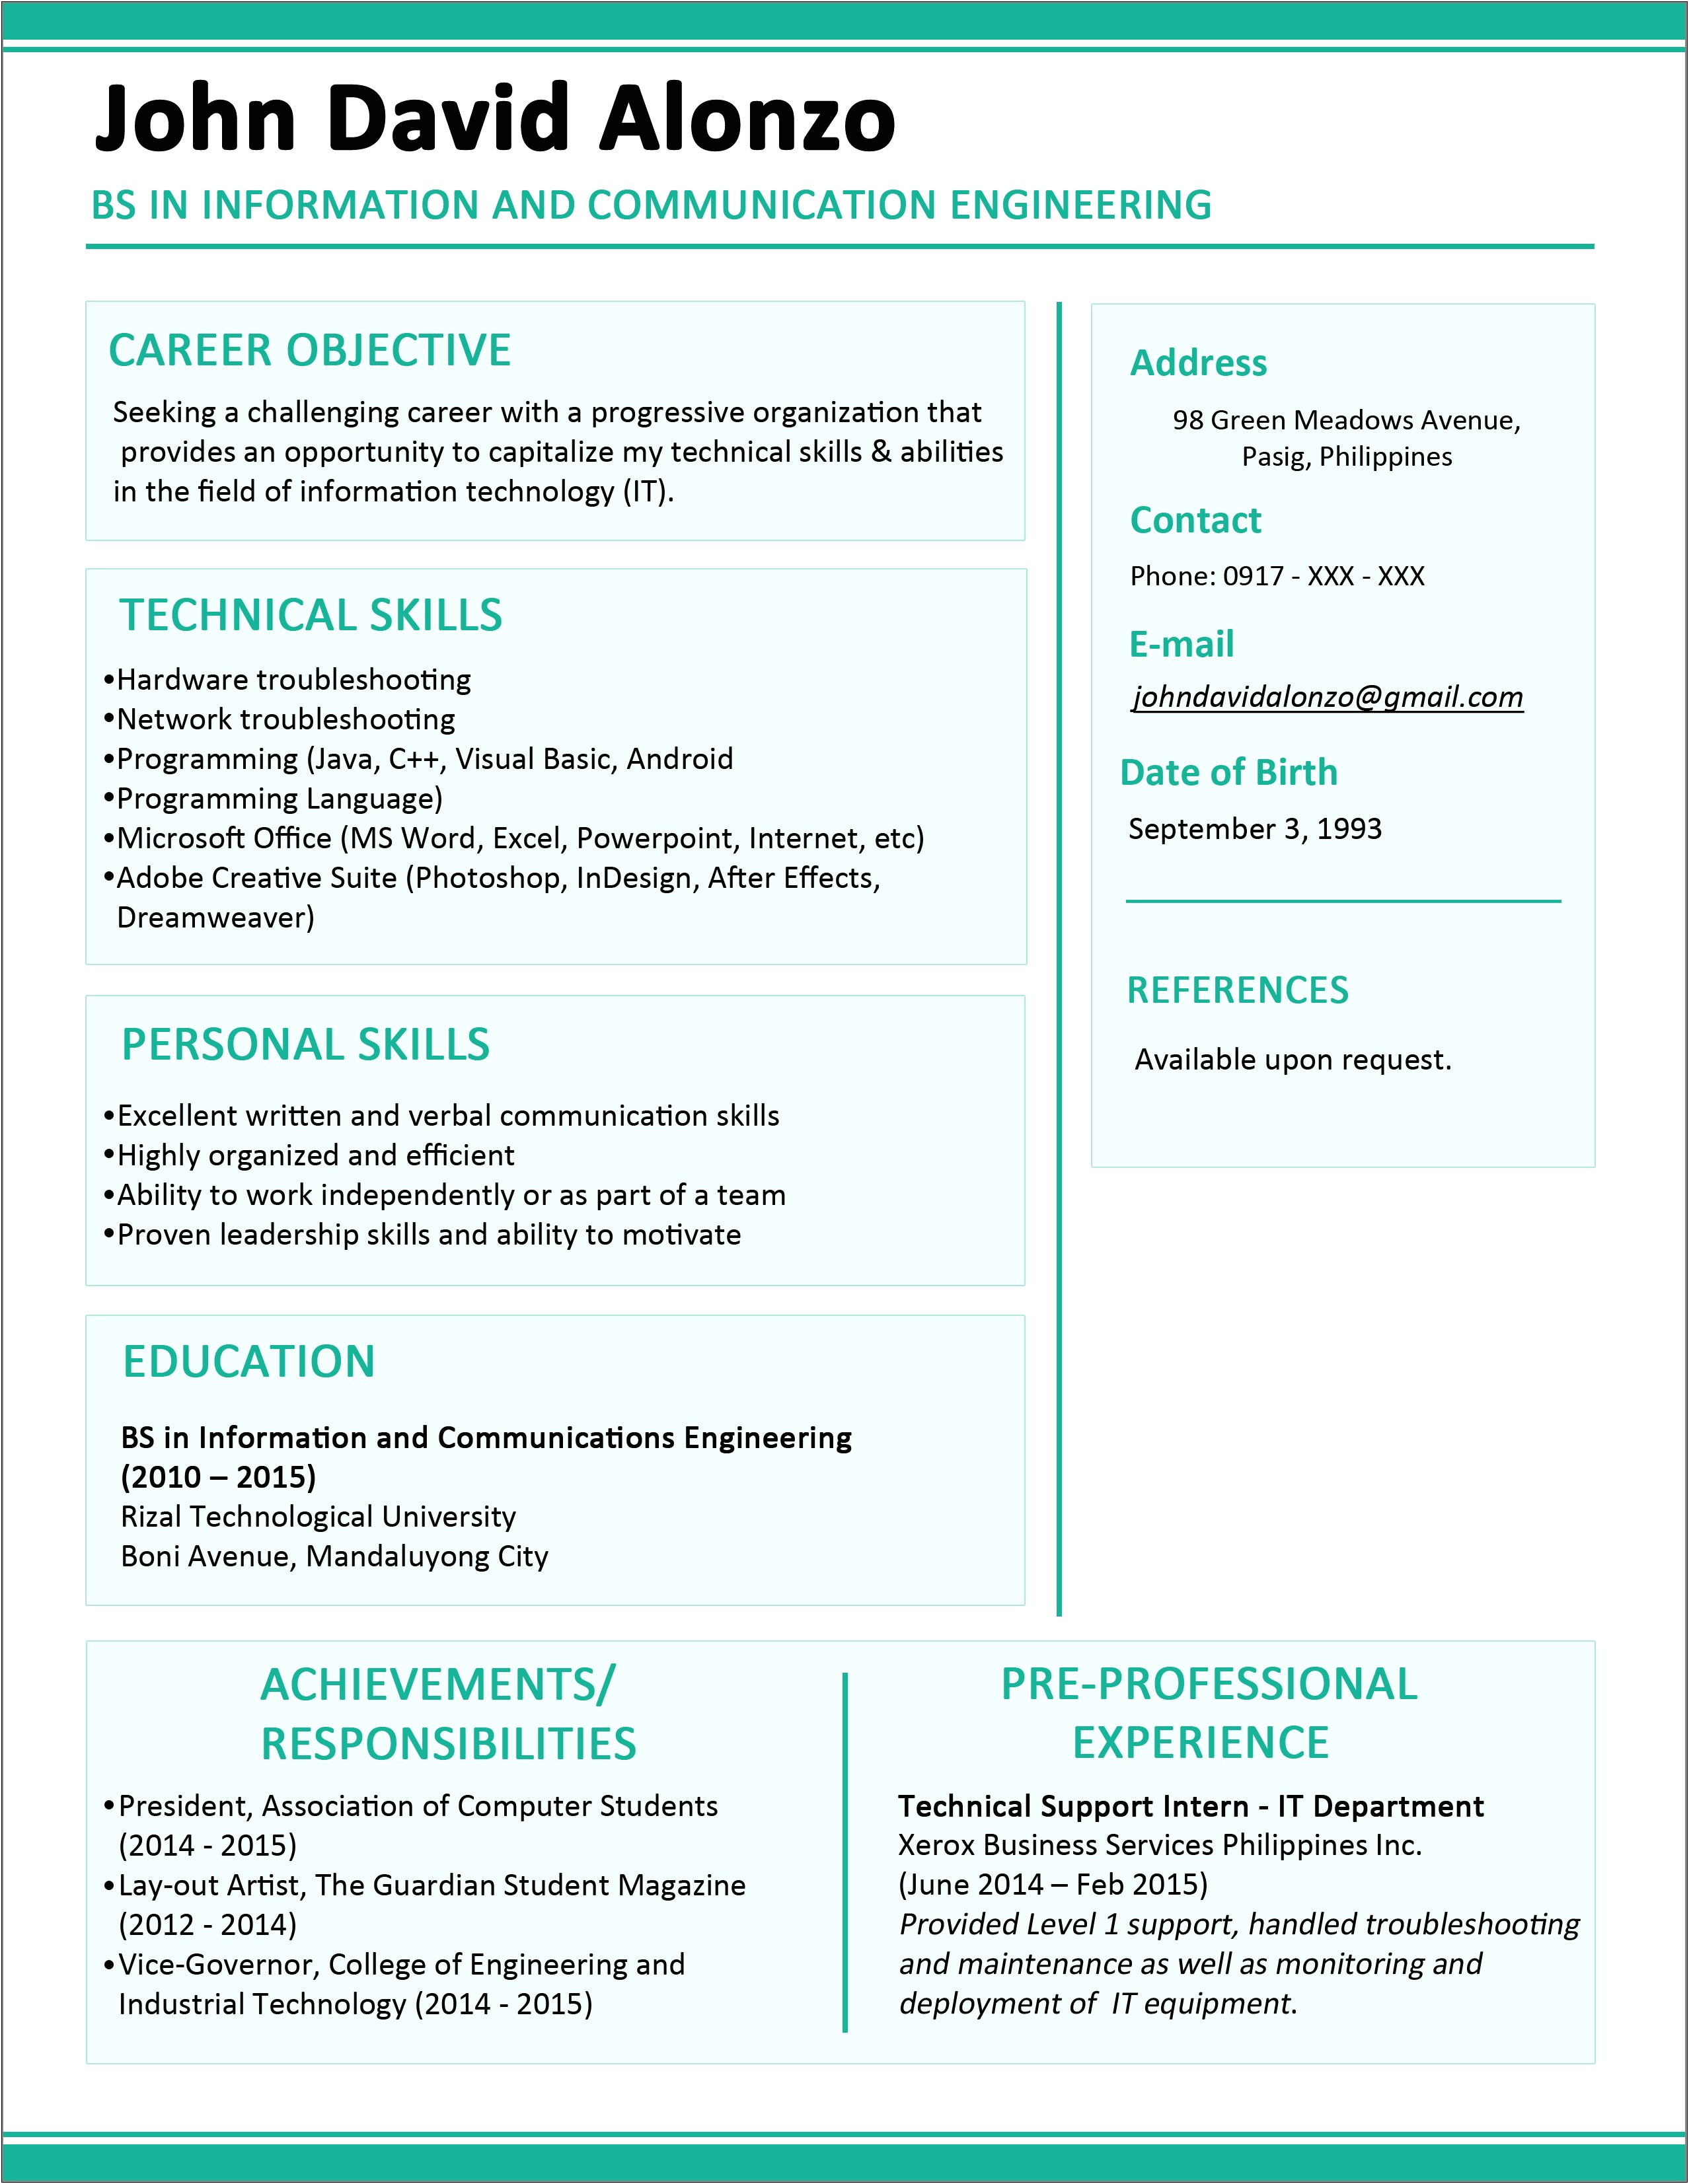 Resume Format For Applying Job Abroad